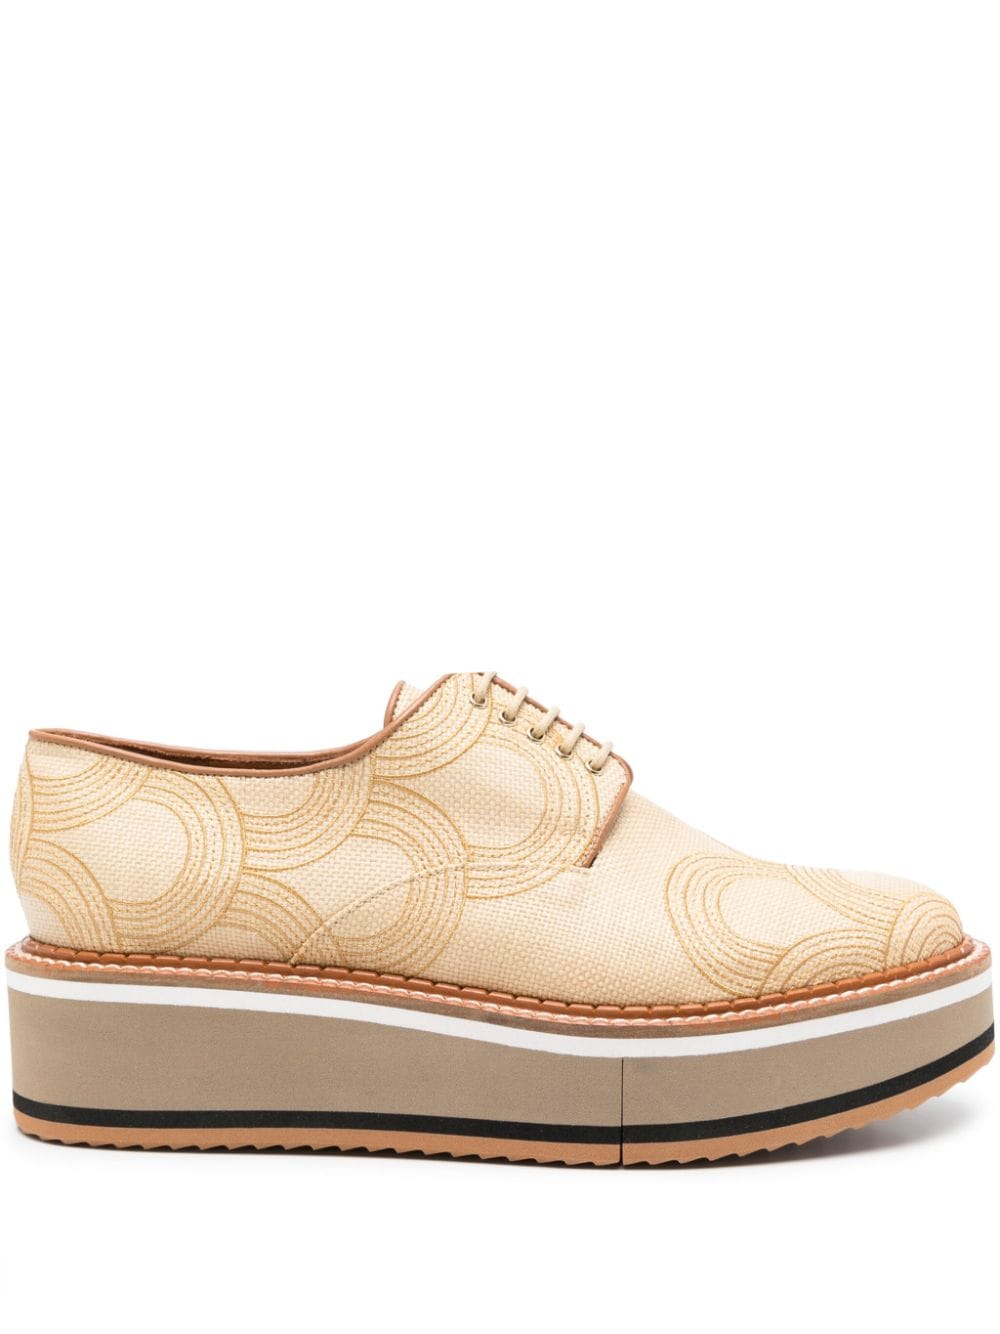 Baxter 45mm Oxford shoes